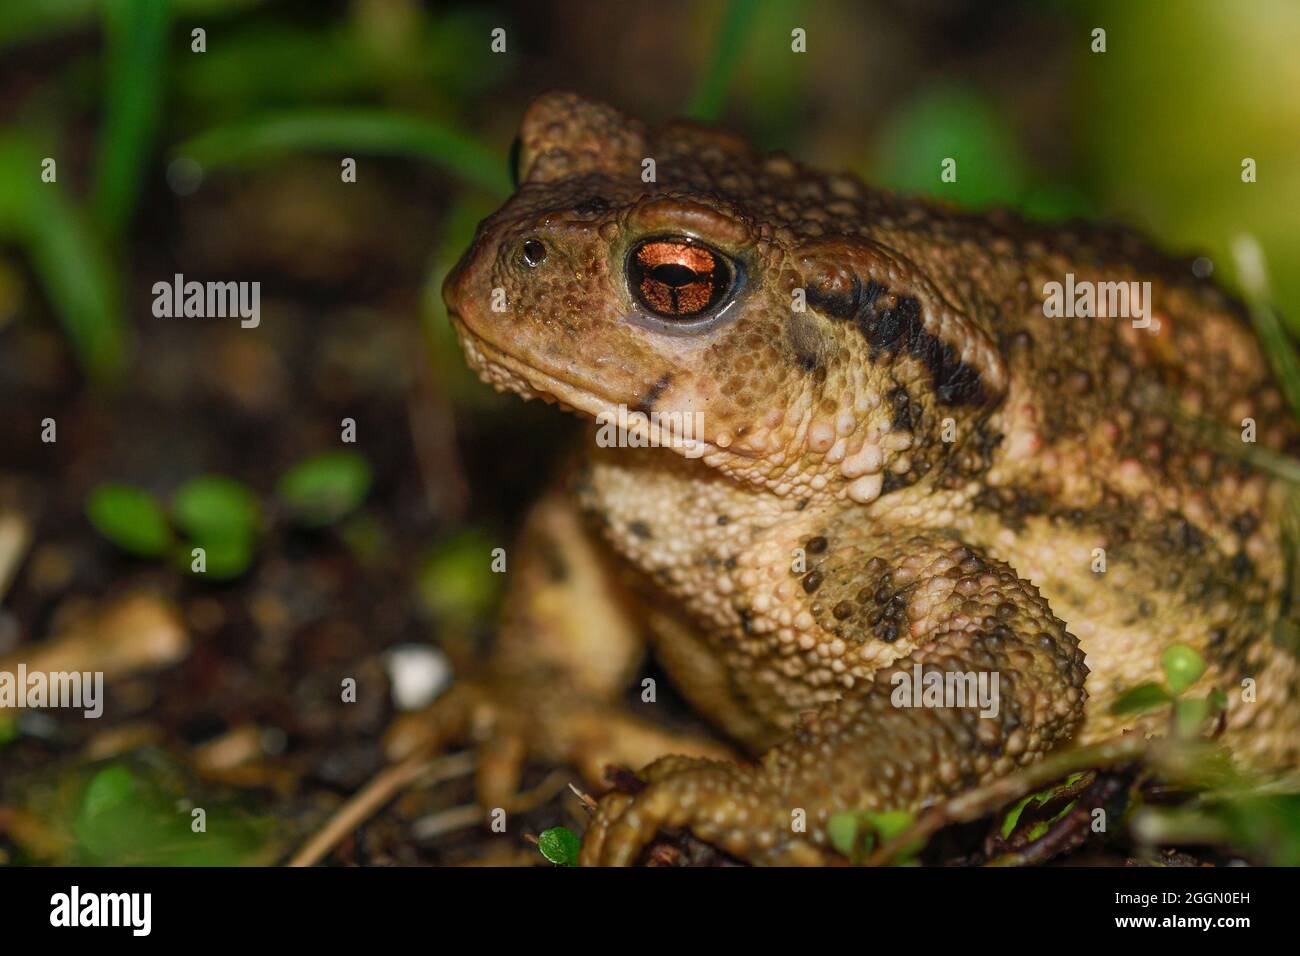 Closeup of a common toad Stock Photo